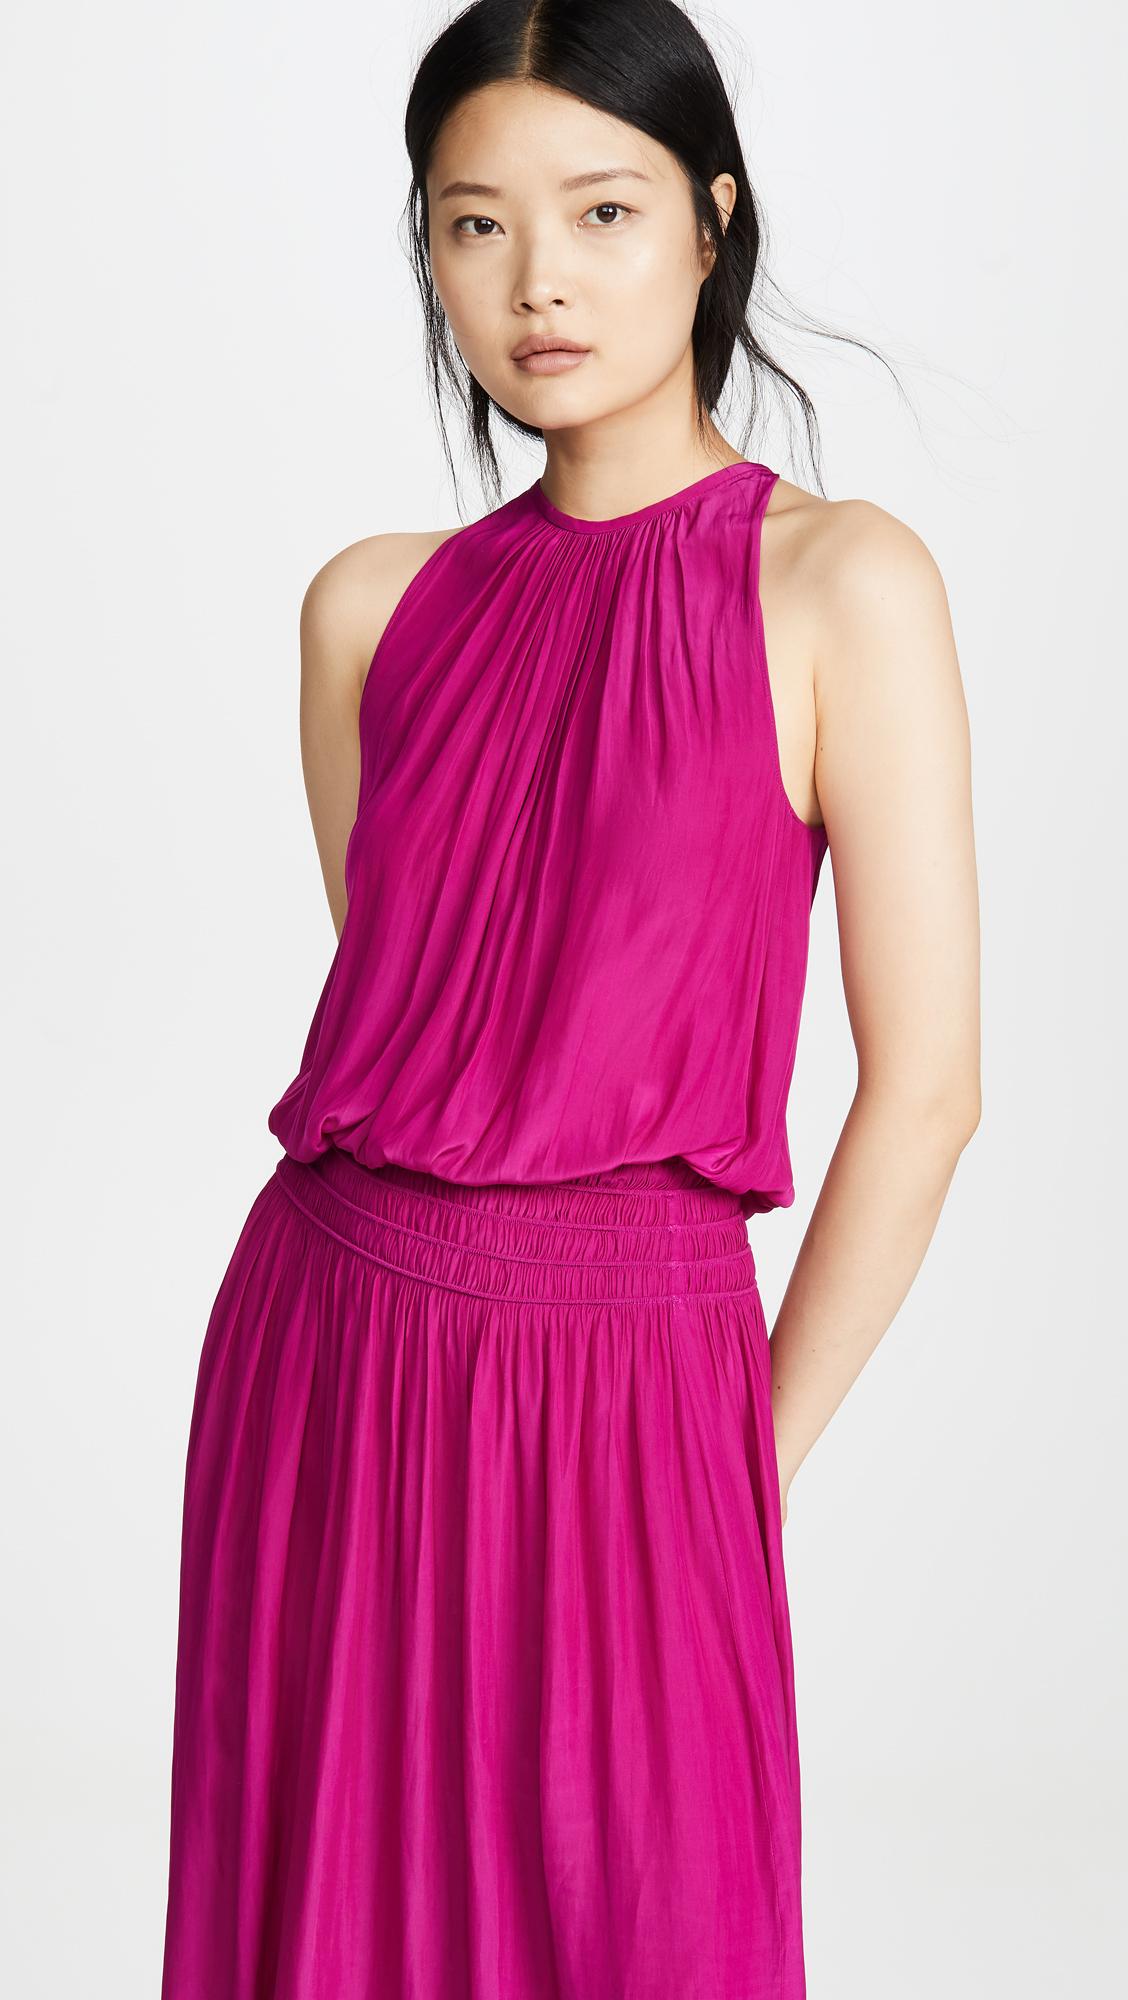 Ramy Brook Synthetic Audrey Dress in Deep Fuchsia (Pink) - Lyst